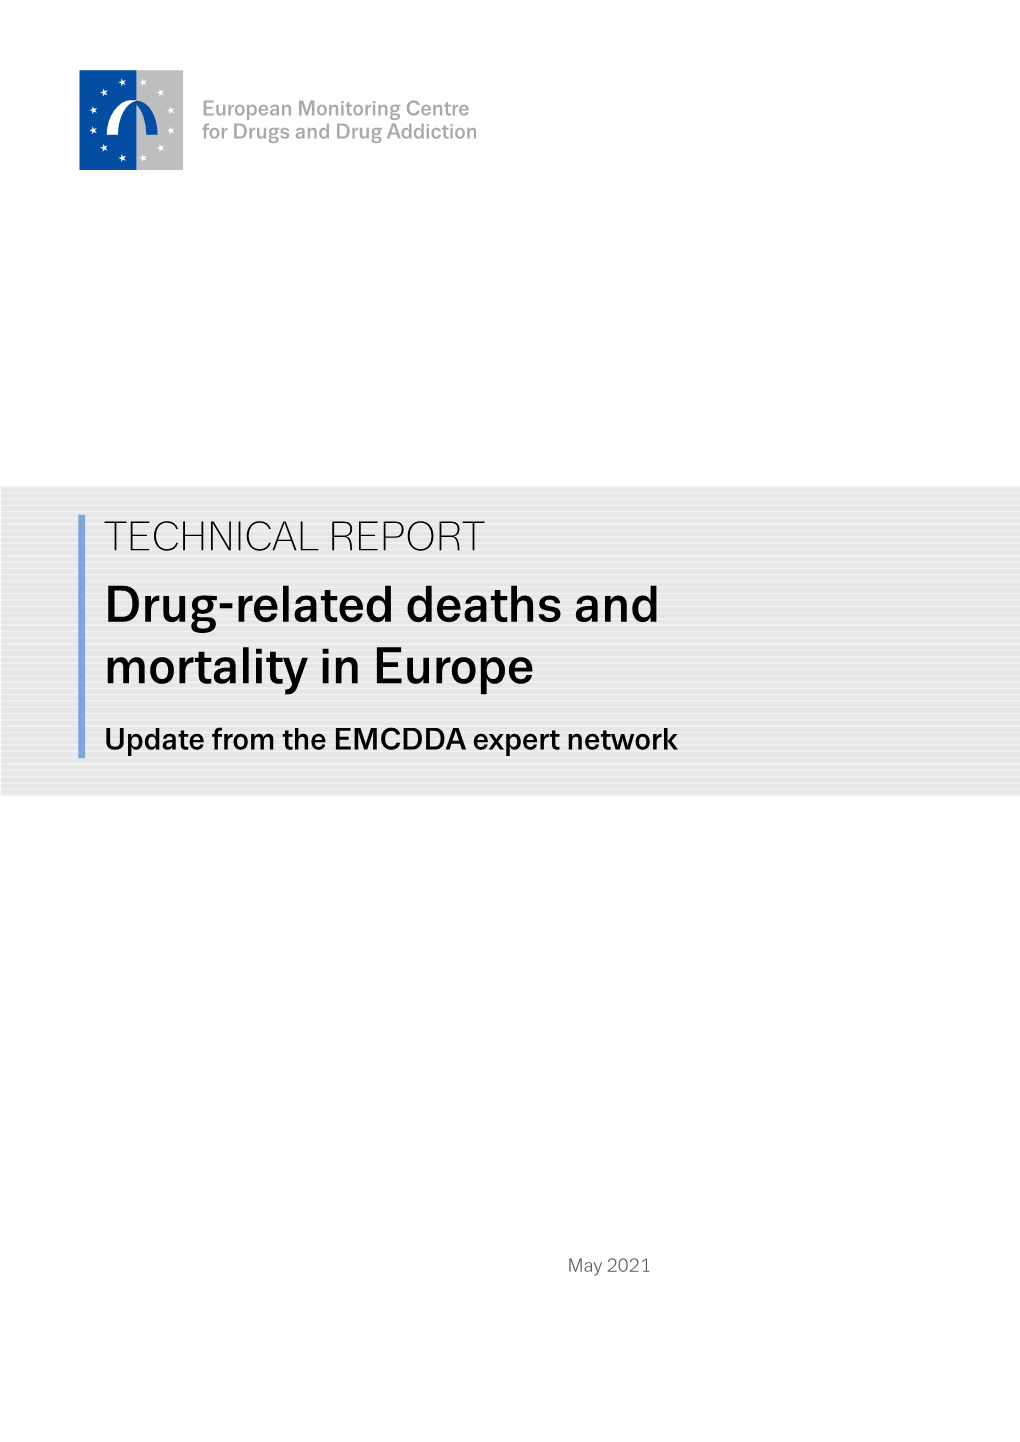 TECHNICAL REPORT Drug-Related Deaths and Mortality in Europe Update from the EMCDDA Expert Network